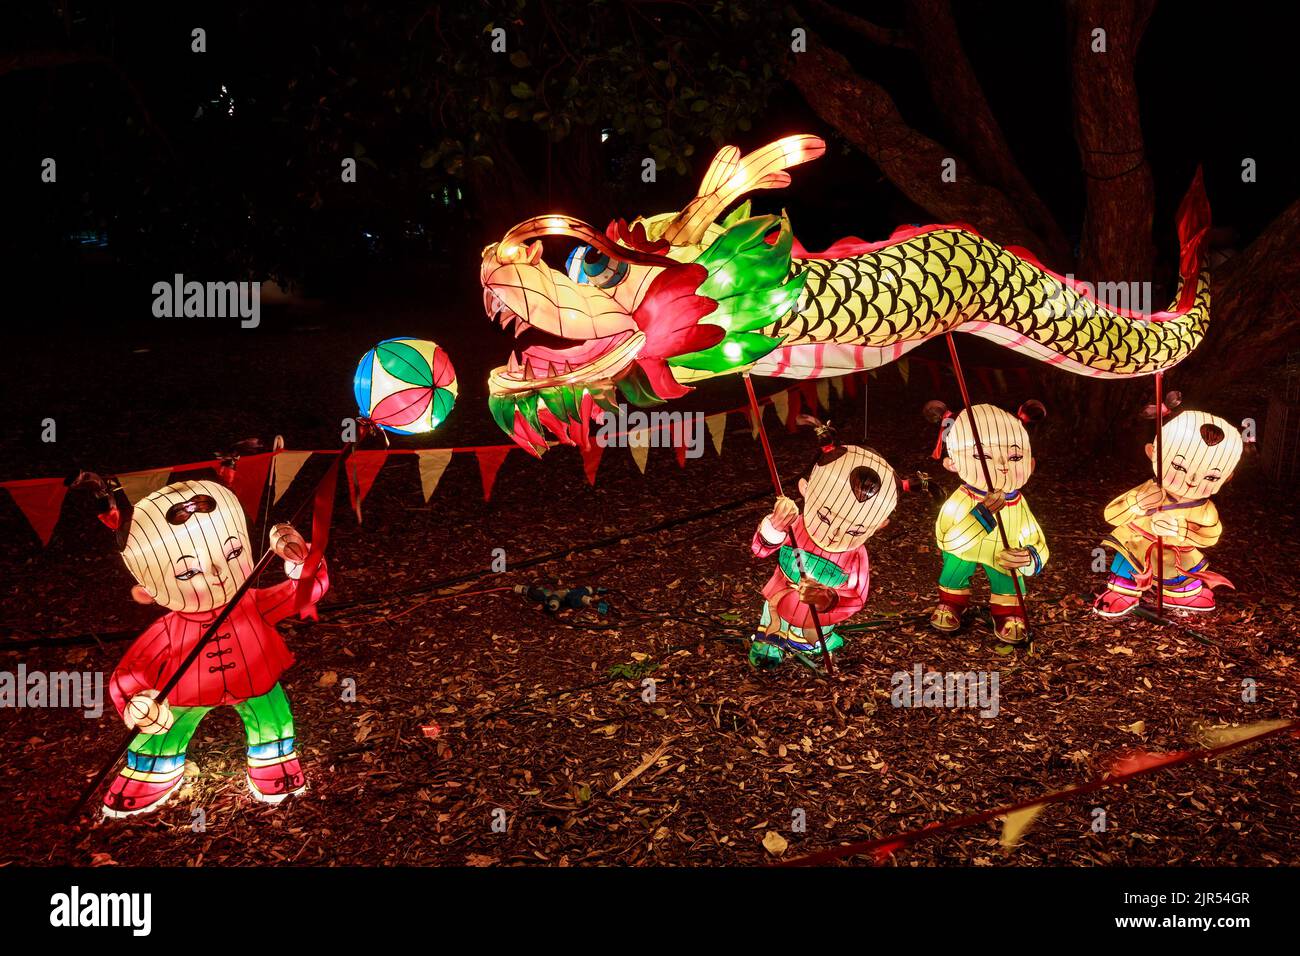 Chinese New Year lantern art. A group of sculptures depicting boys doing a dragon dance Stock Photo